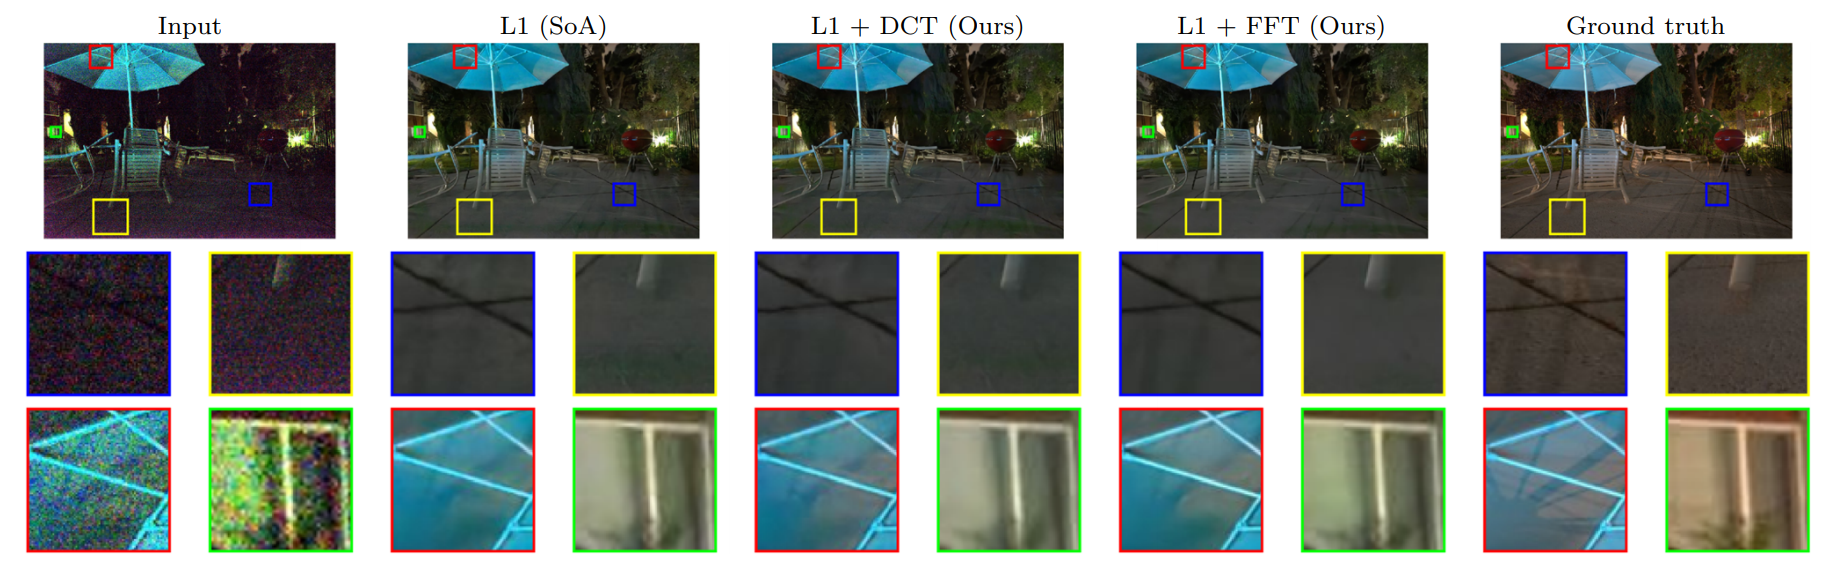 Frequency-domain loss function for deep exposure correction of dark images